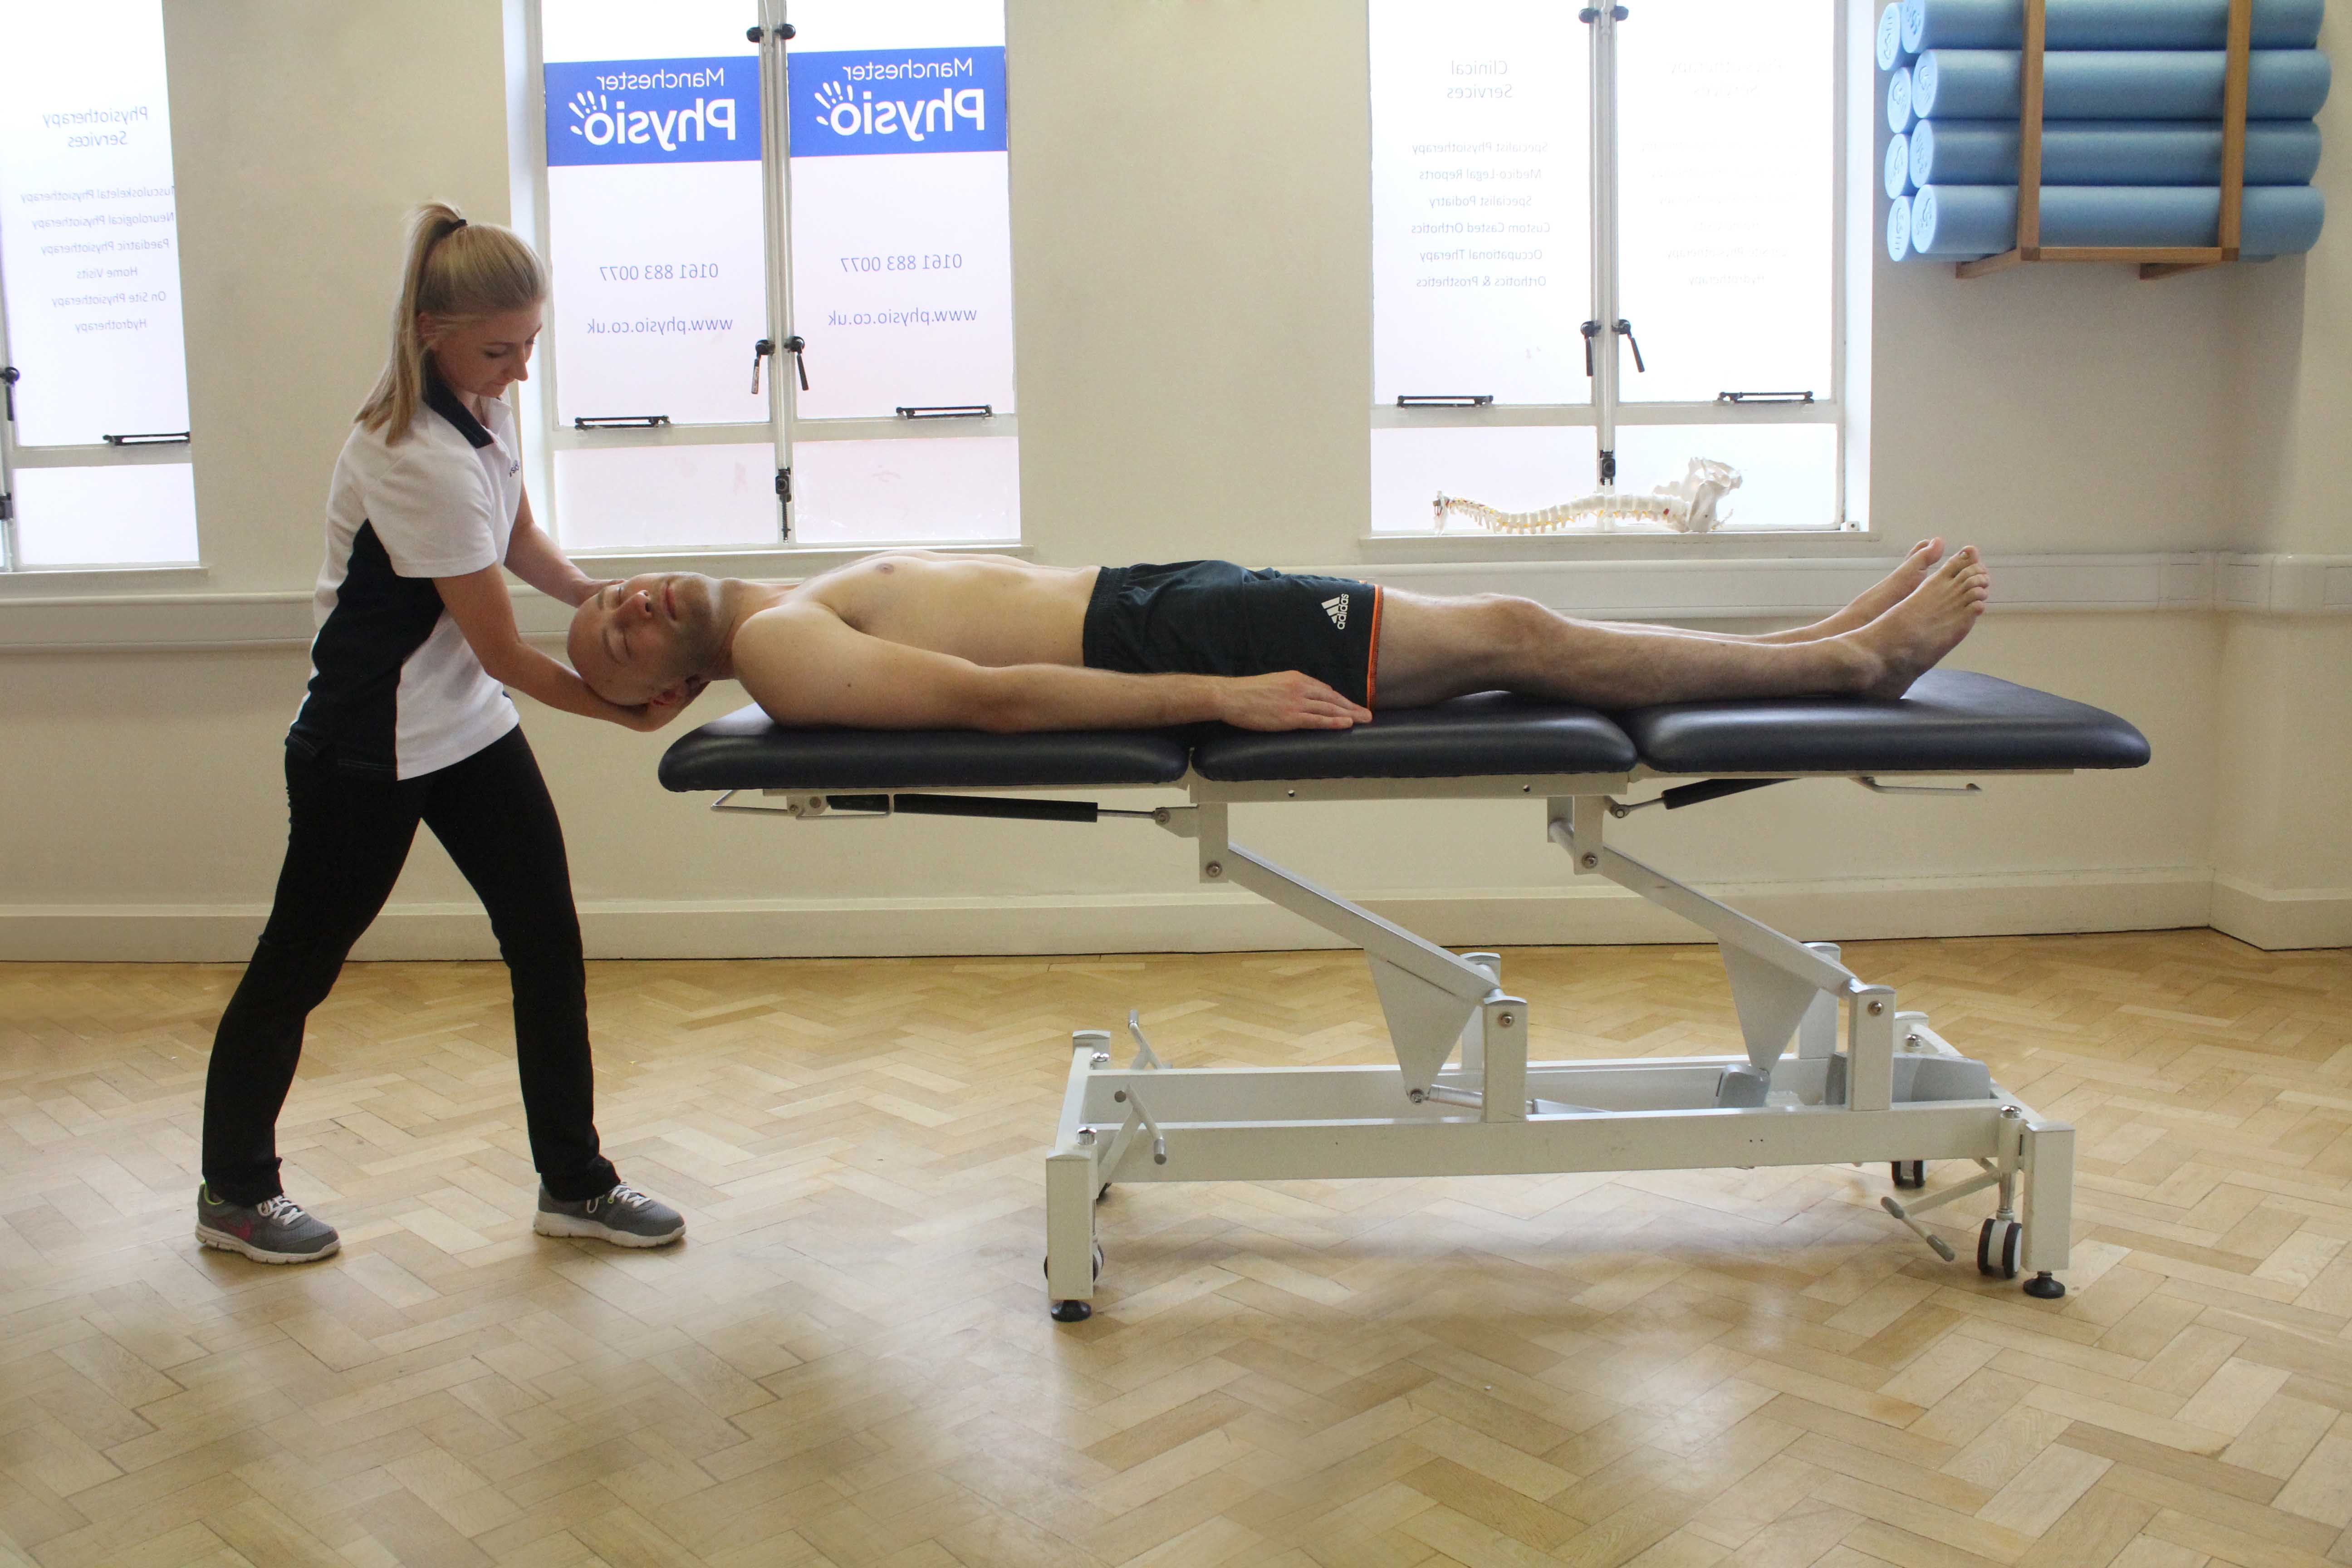 Vestibular realignment exercises to correct dizziness conducted by specialist therapist